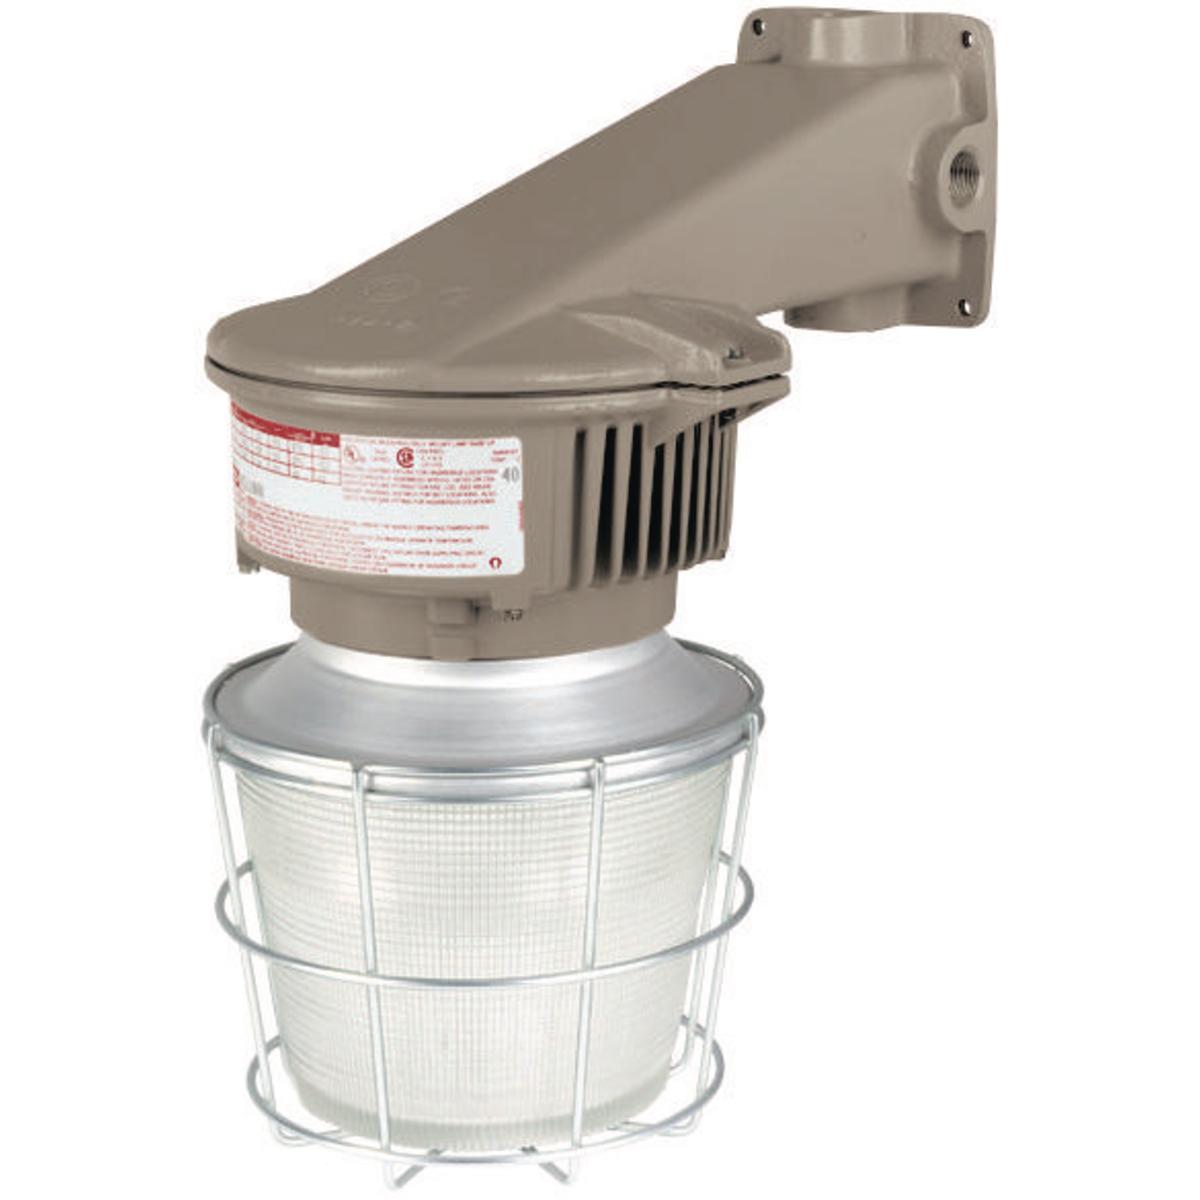 Hubbell MBL2230B2S8G The MBL Series is a compact low bay energy efficient LED. The design of the MBL makes it suitable for harsh and hazardous environments using a cast copper-free aluminum. Its low profile and compact design allow the MBL to fit in areas where larger fixture